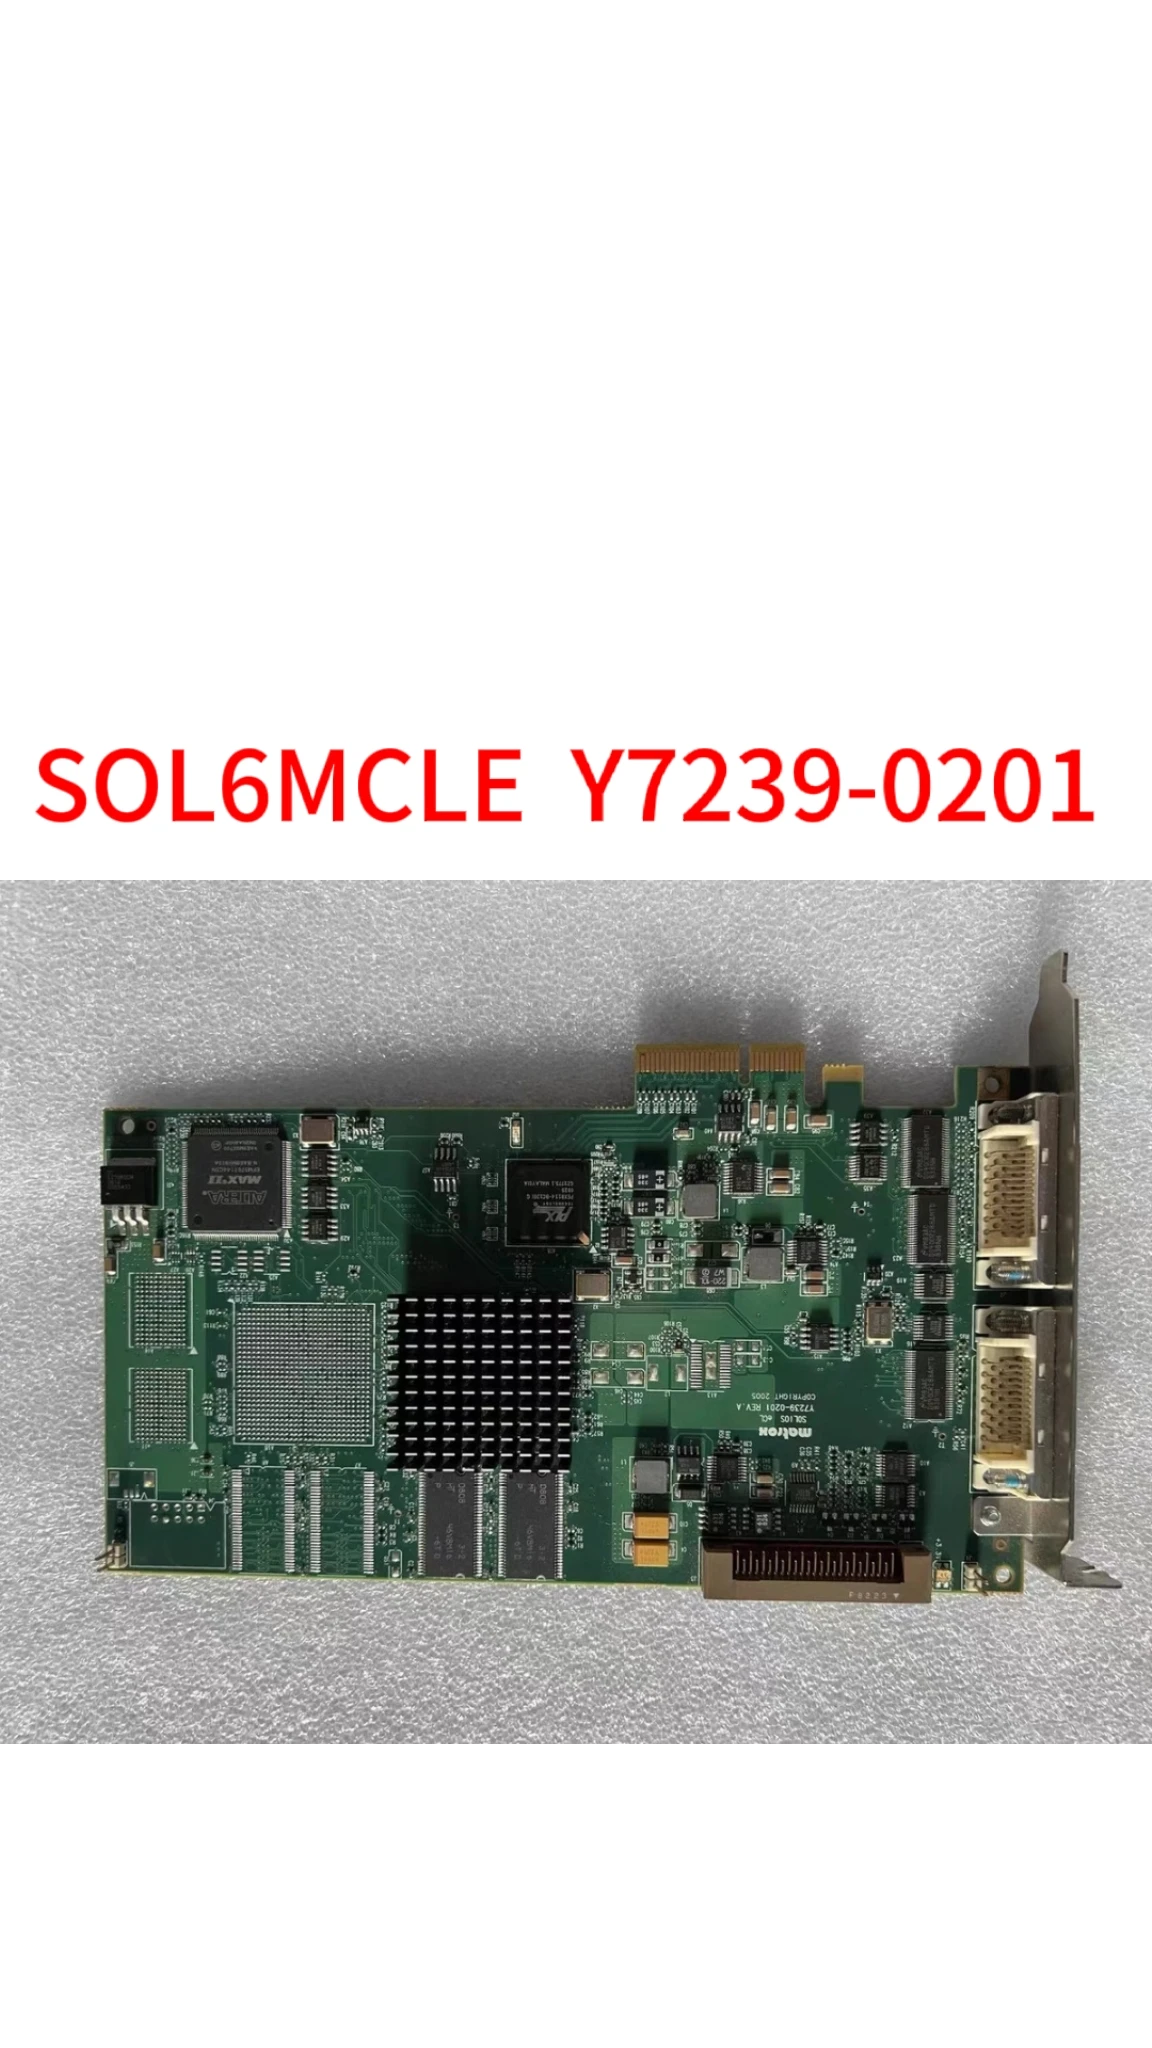 

Second-hand SOL6MCLE Y7239-0201 test ok